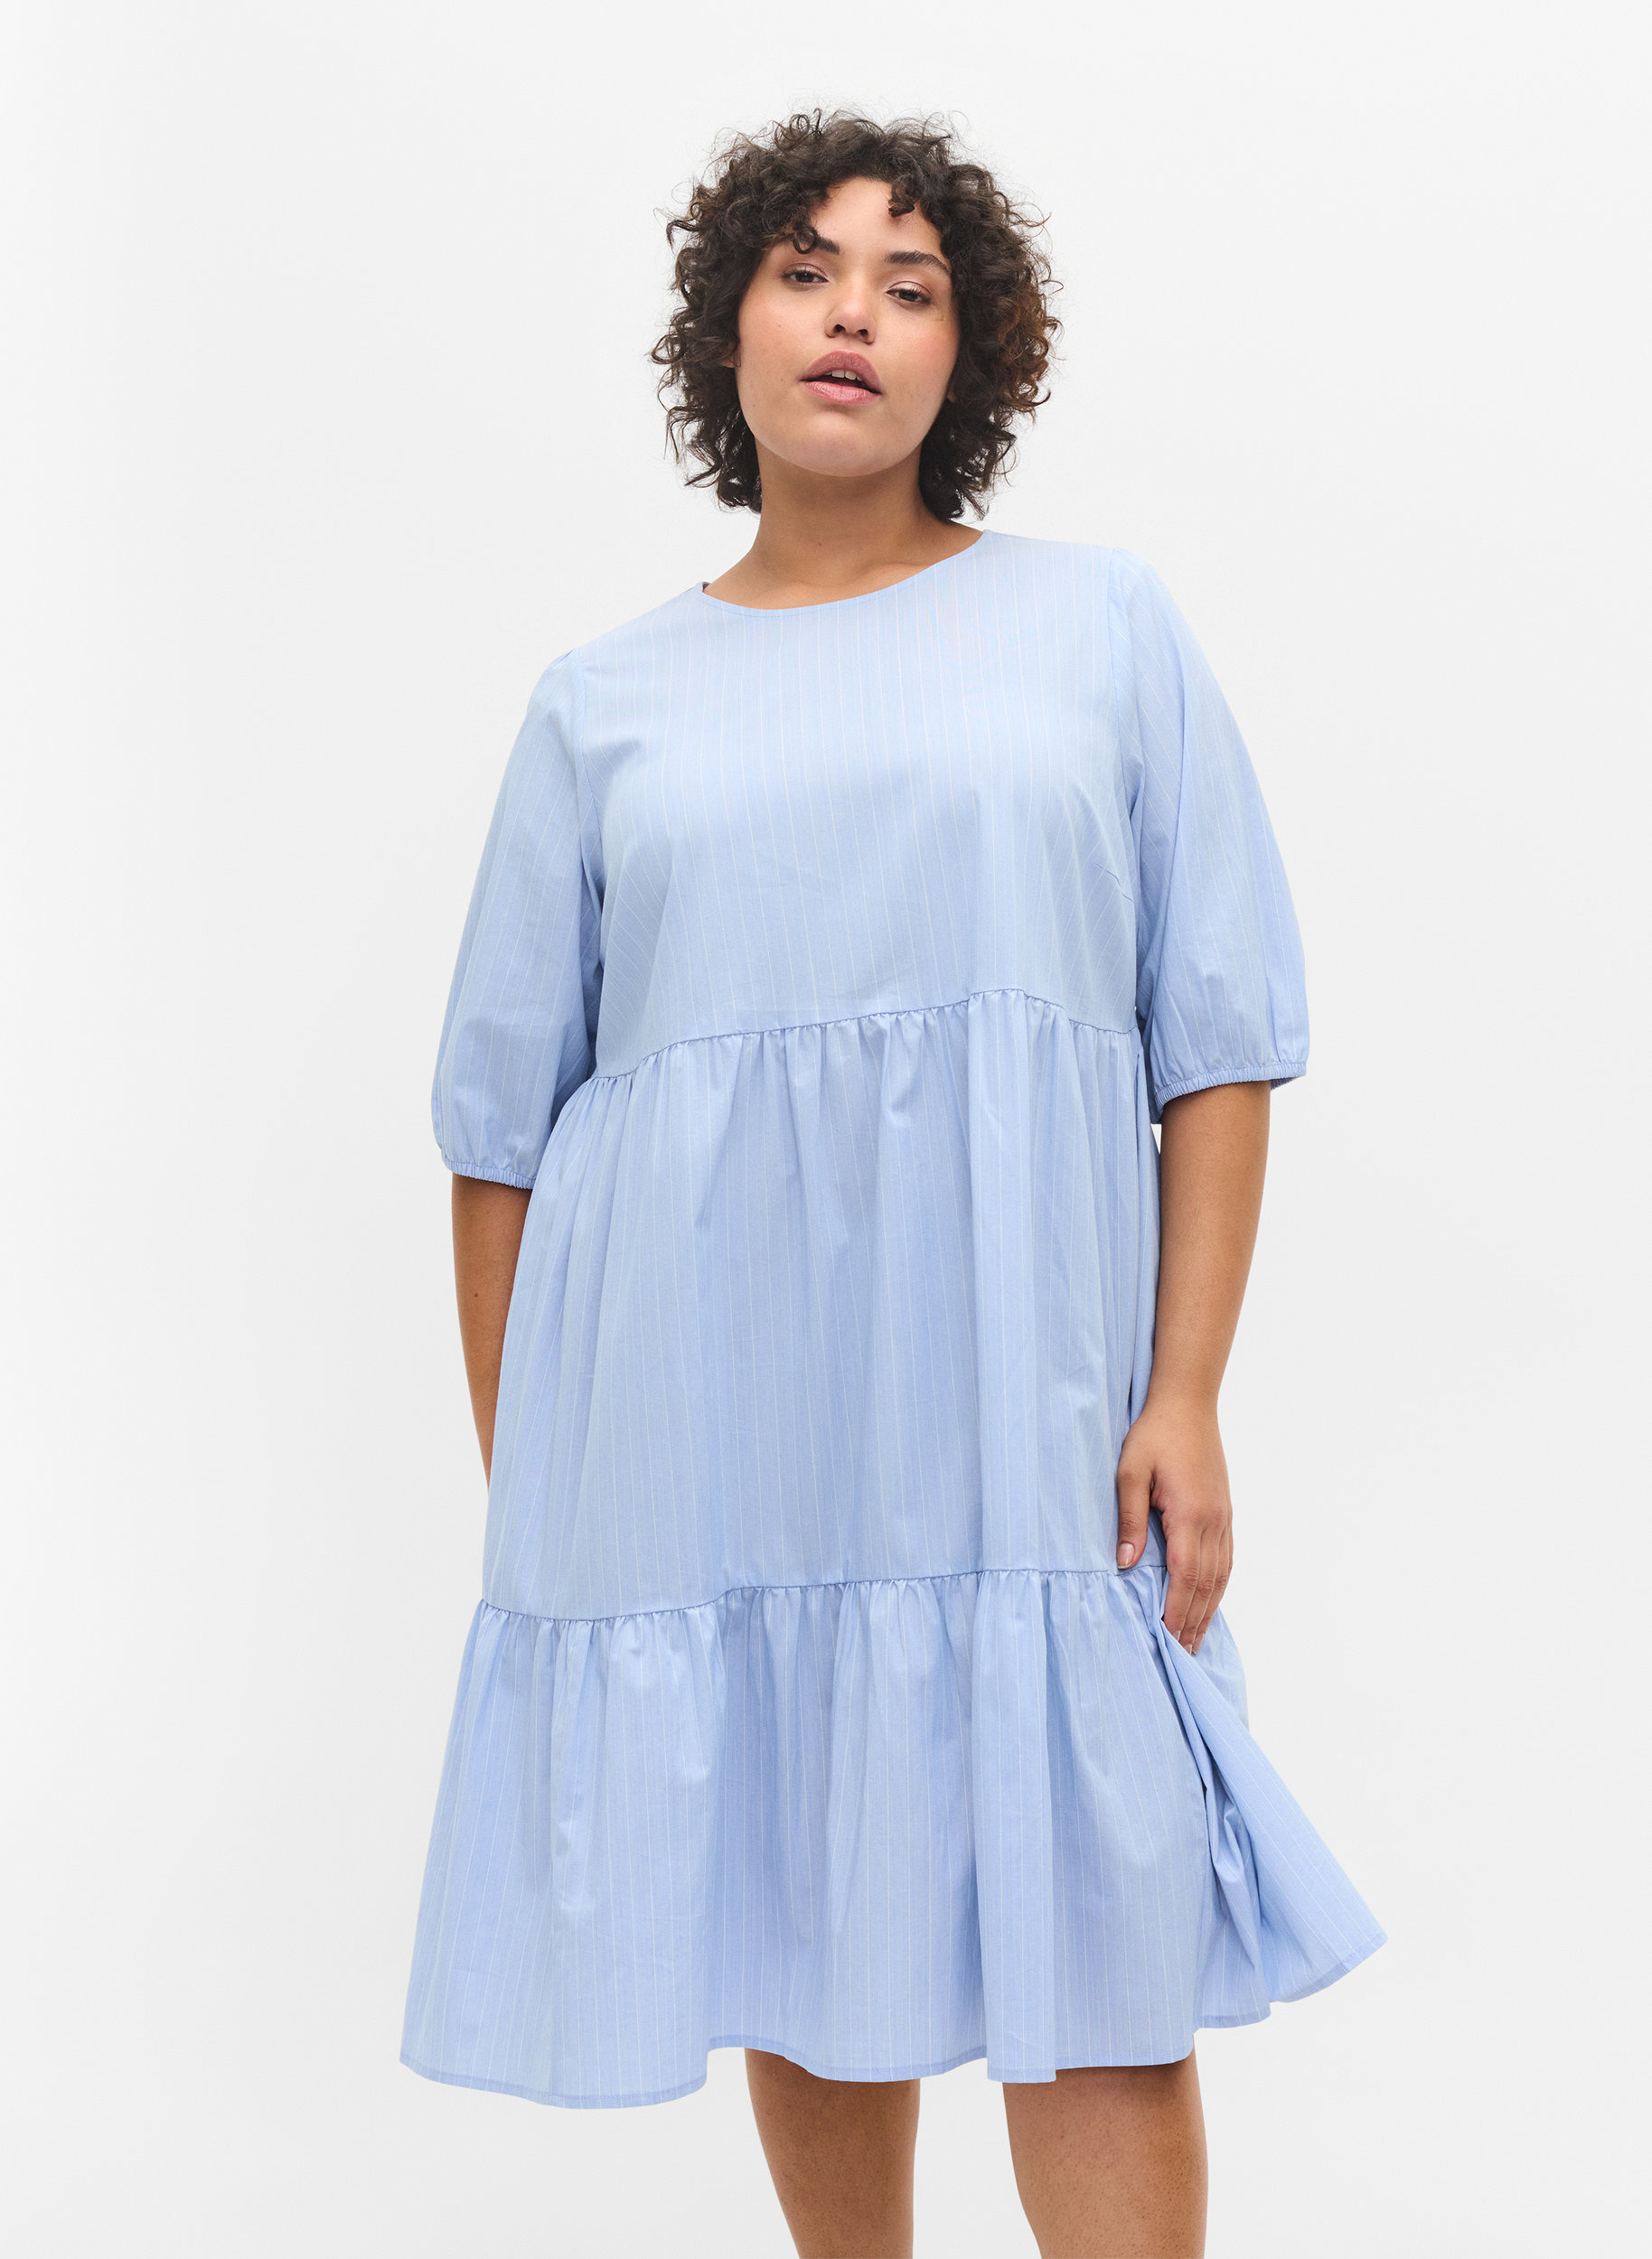 Striped dress with short puff sleeves, Blue As Sample, Model